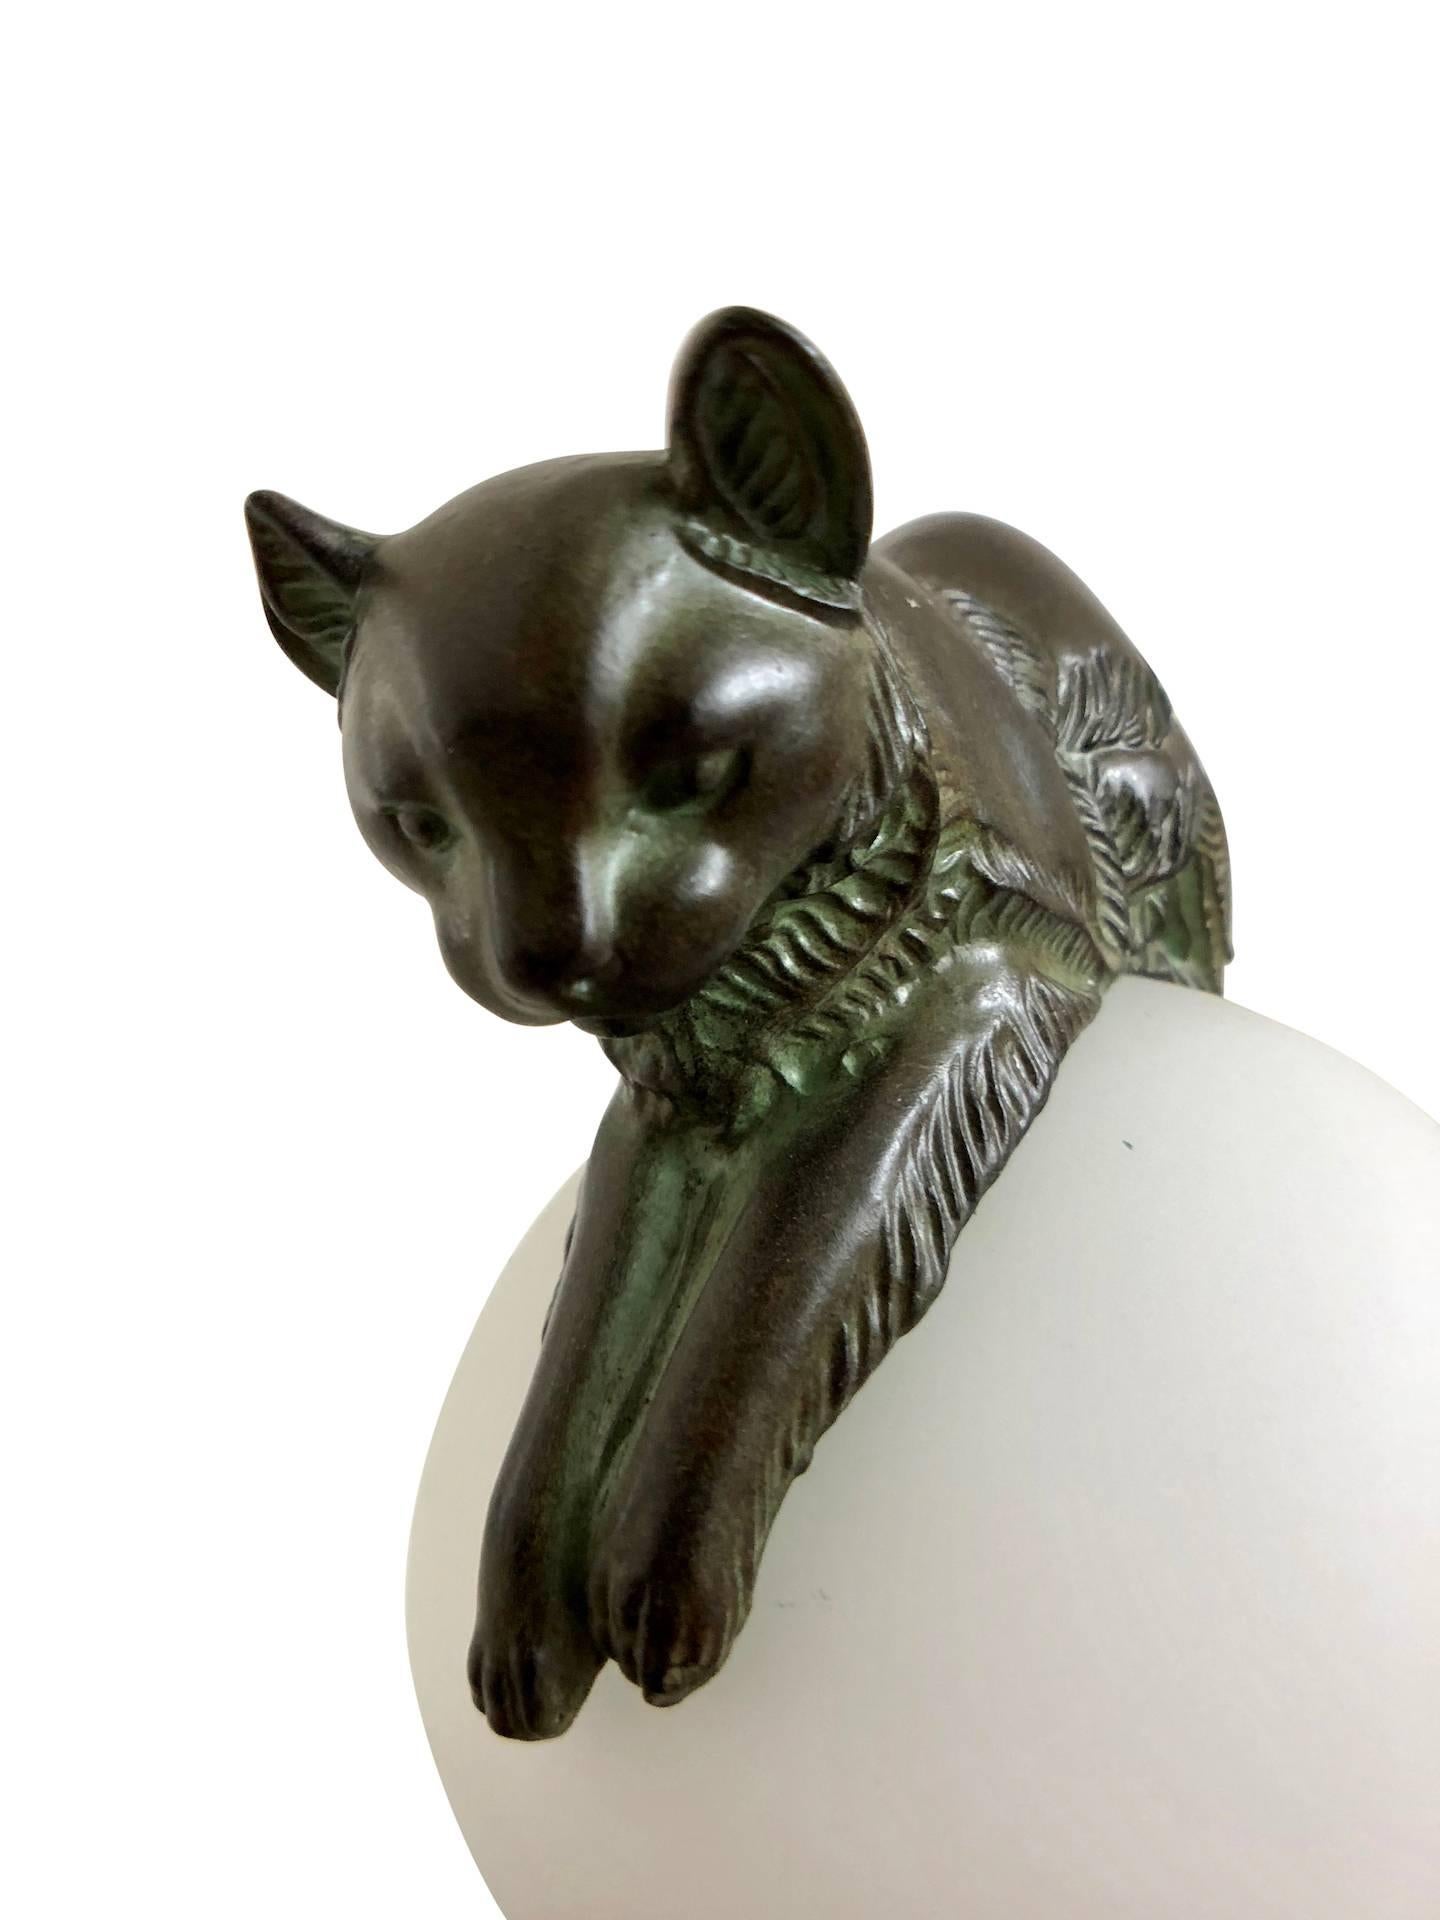 Art Deco Table Lamp, Equilibre, Cat on Glass Ball, by Gaillard, Original Max Le Verrier